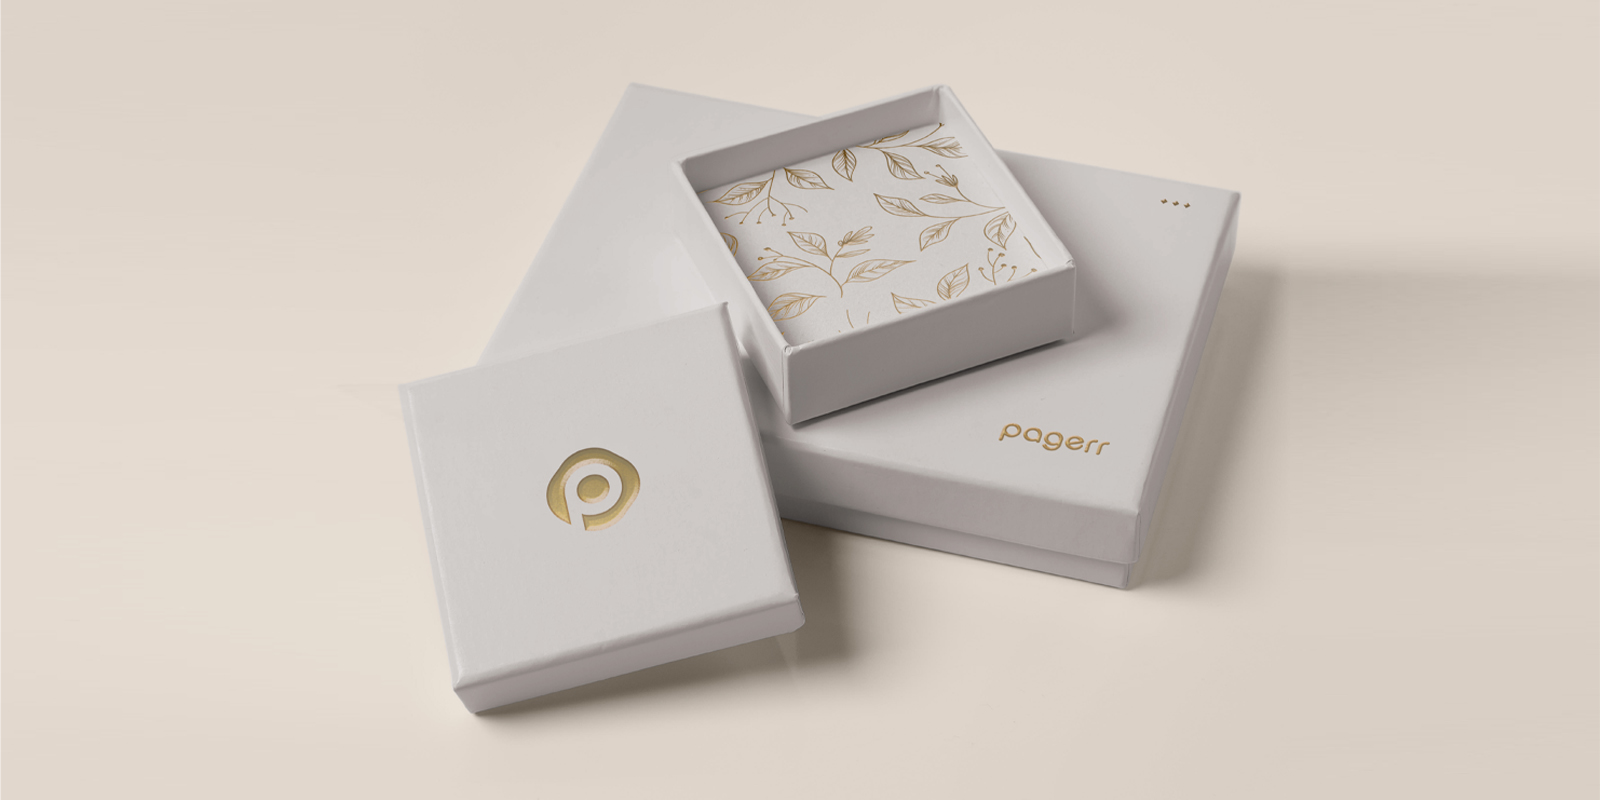 Product boxes in Madrid - Print with Pagerr